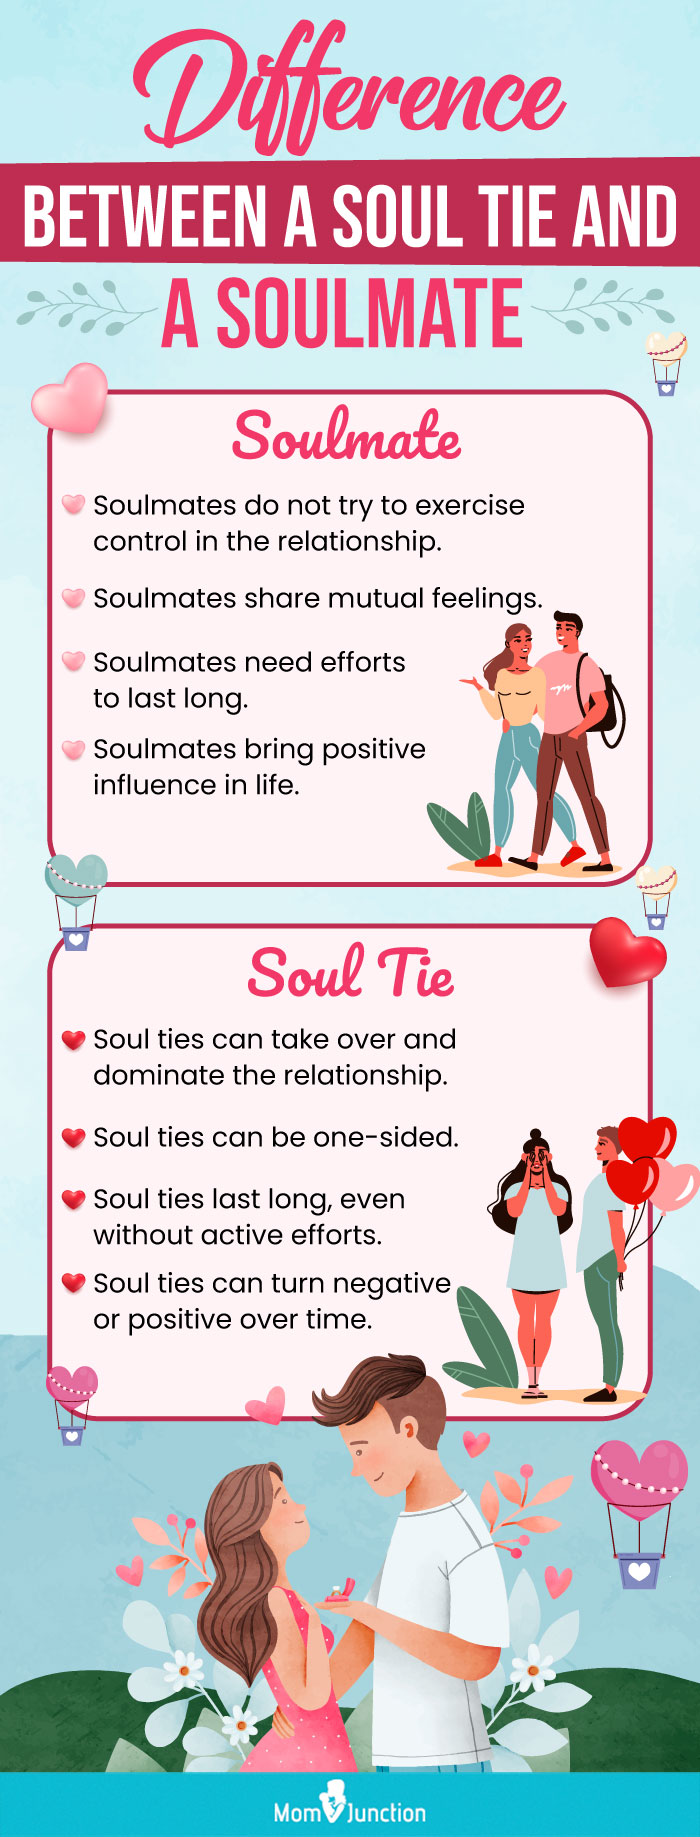 Soul Ties: Meaning, Signs, And Tips To Break A Soul Tie